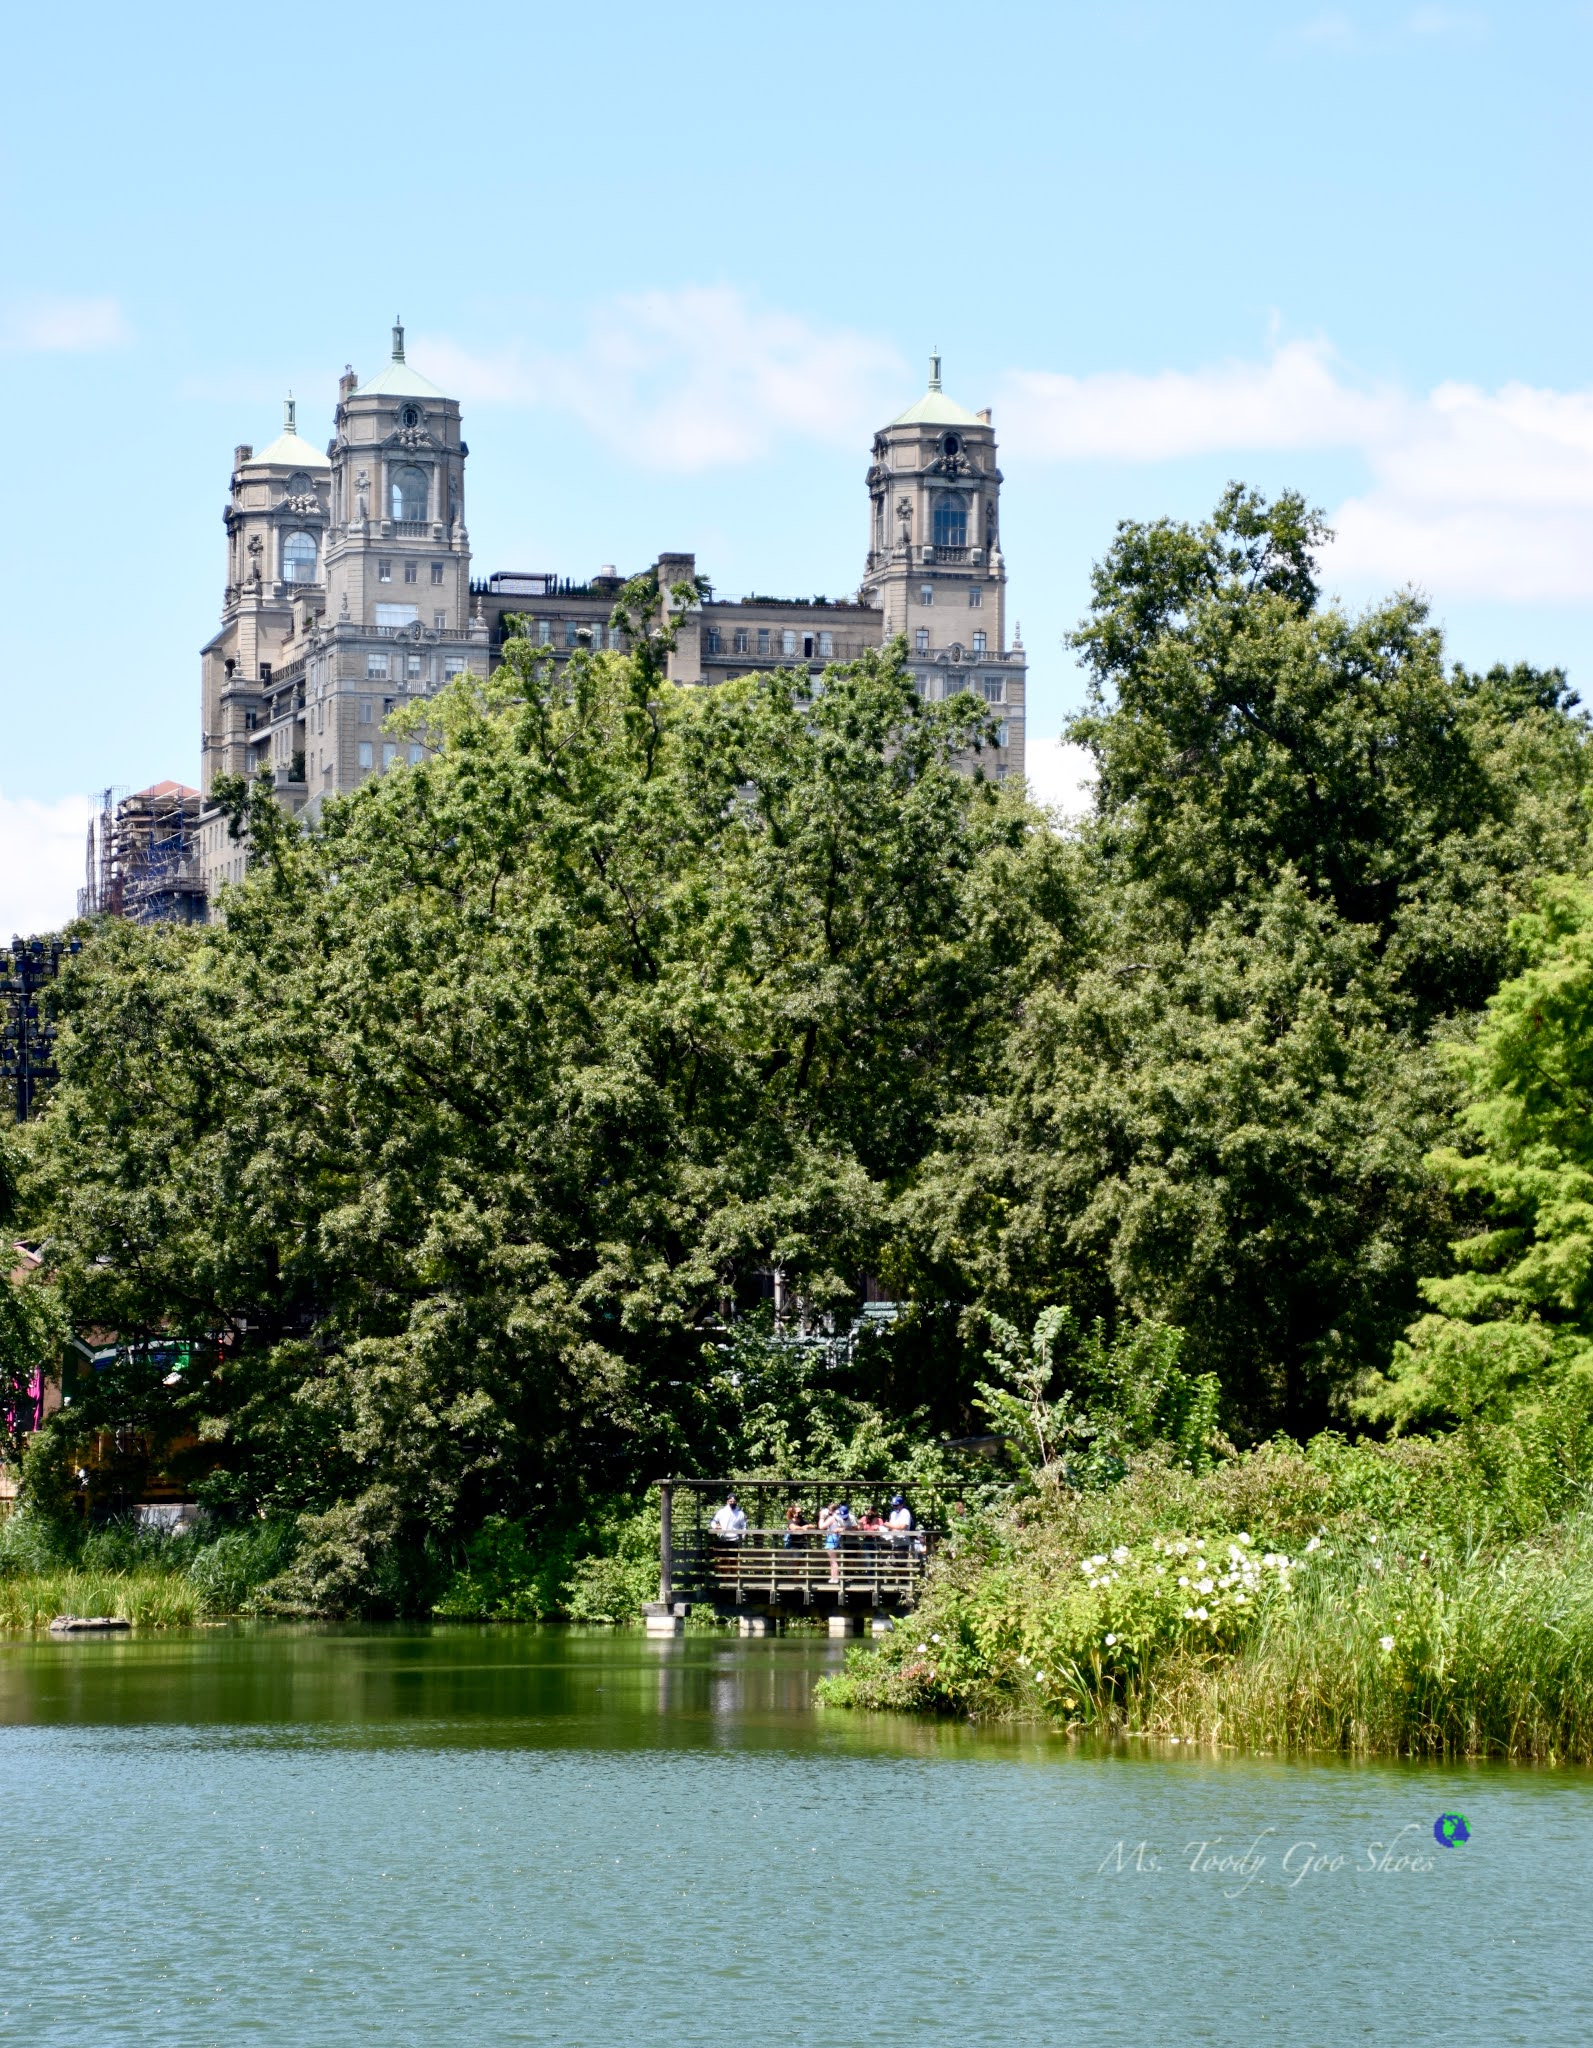 Turtle Pond and Belvedere Castle are two must-see spots to visit in Central Park, New York | Ms. Toody Goo Shoes